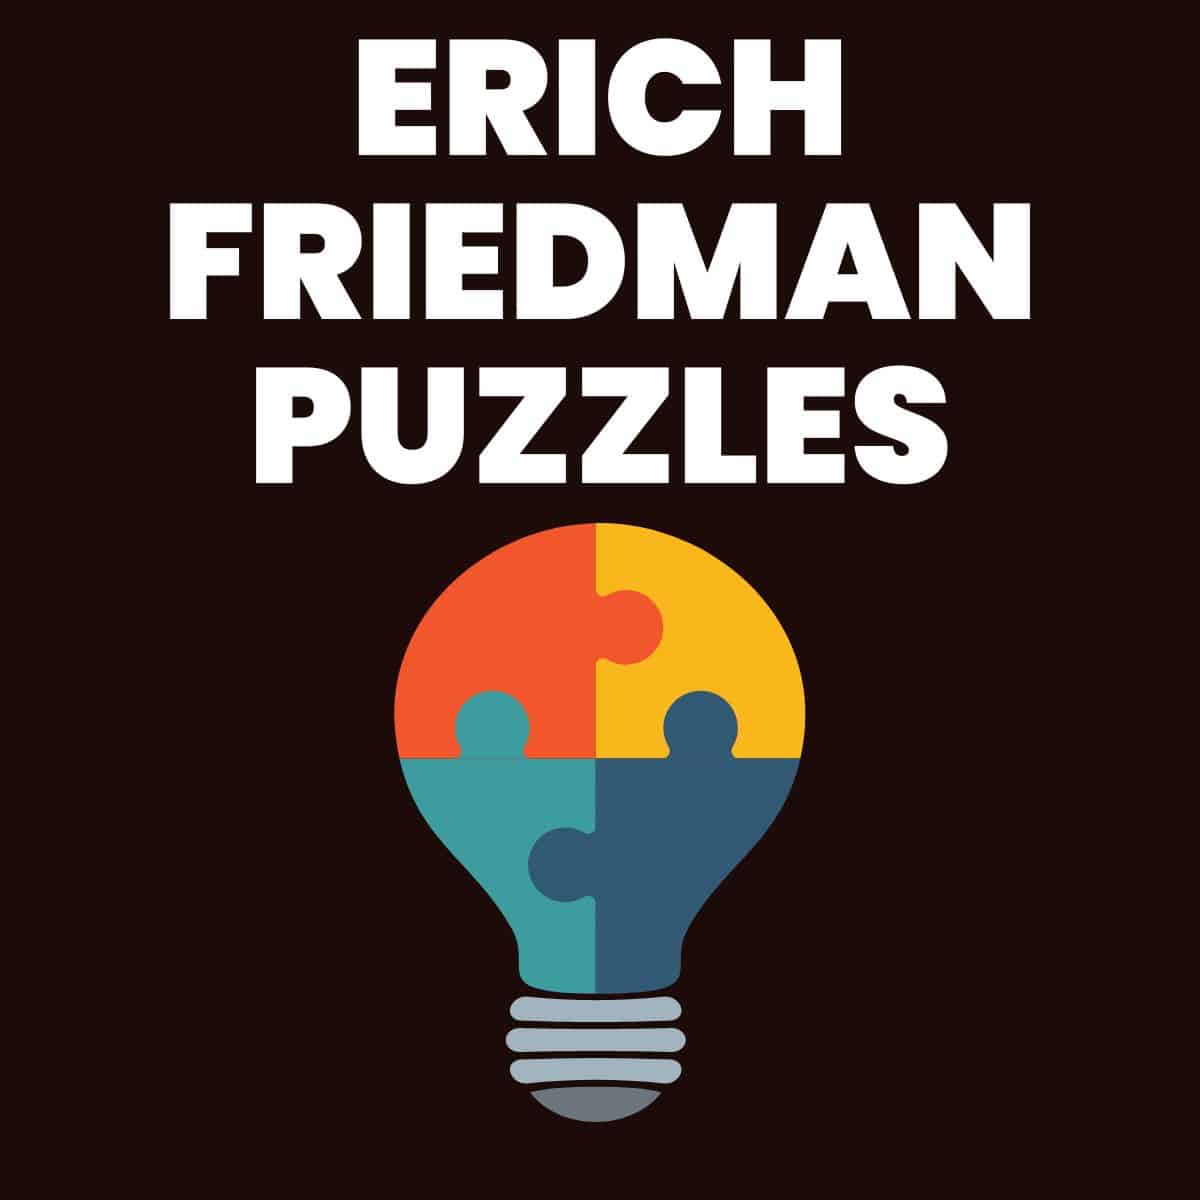 lightbulb composed of four puzzle pieces with text "erich friedman puzzles" 